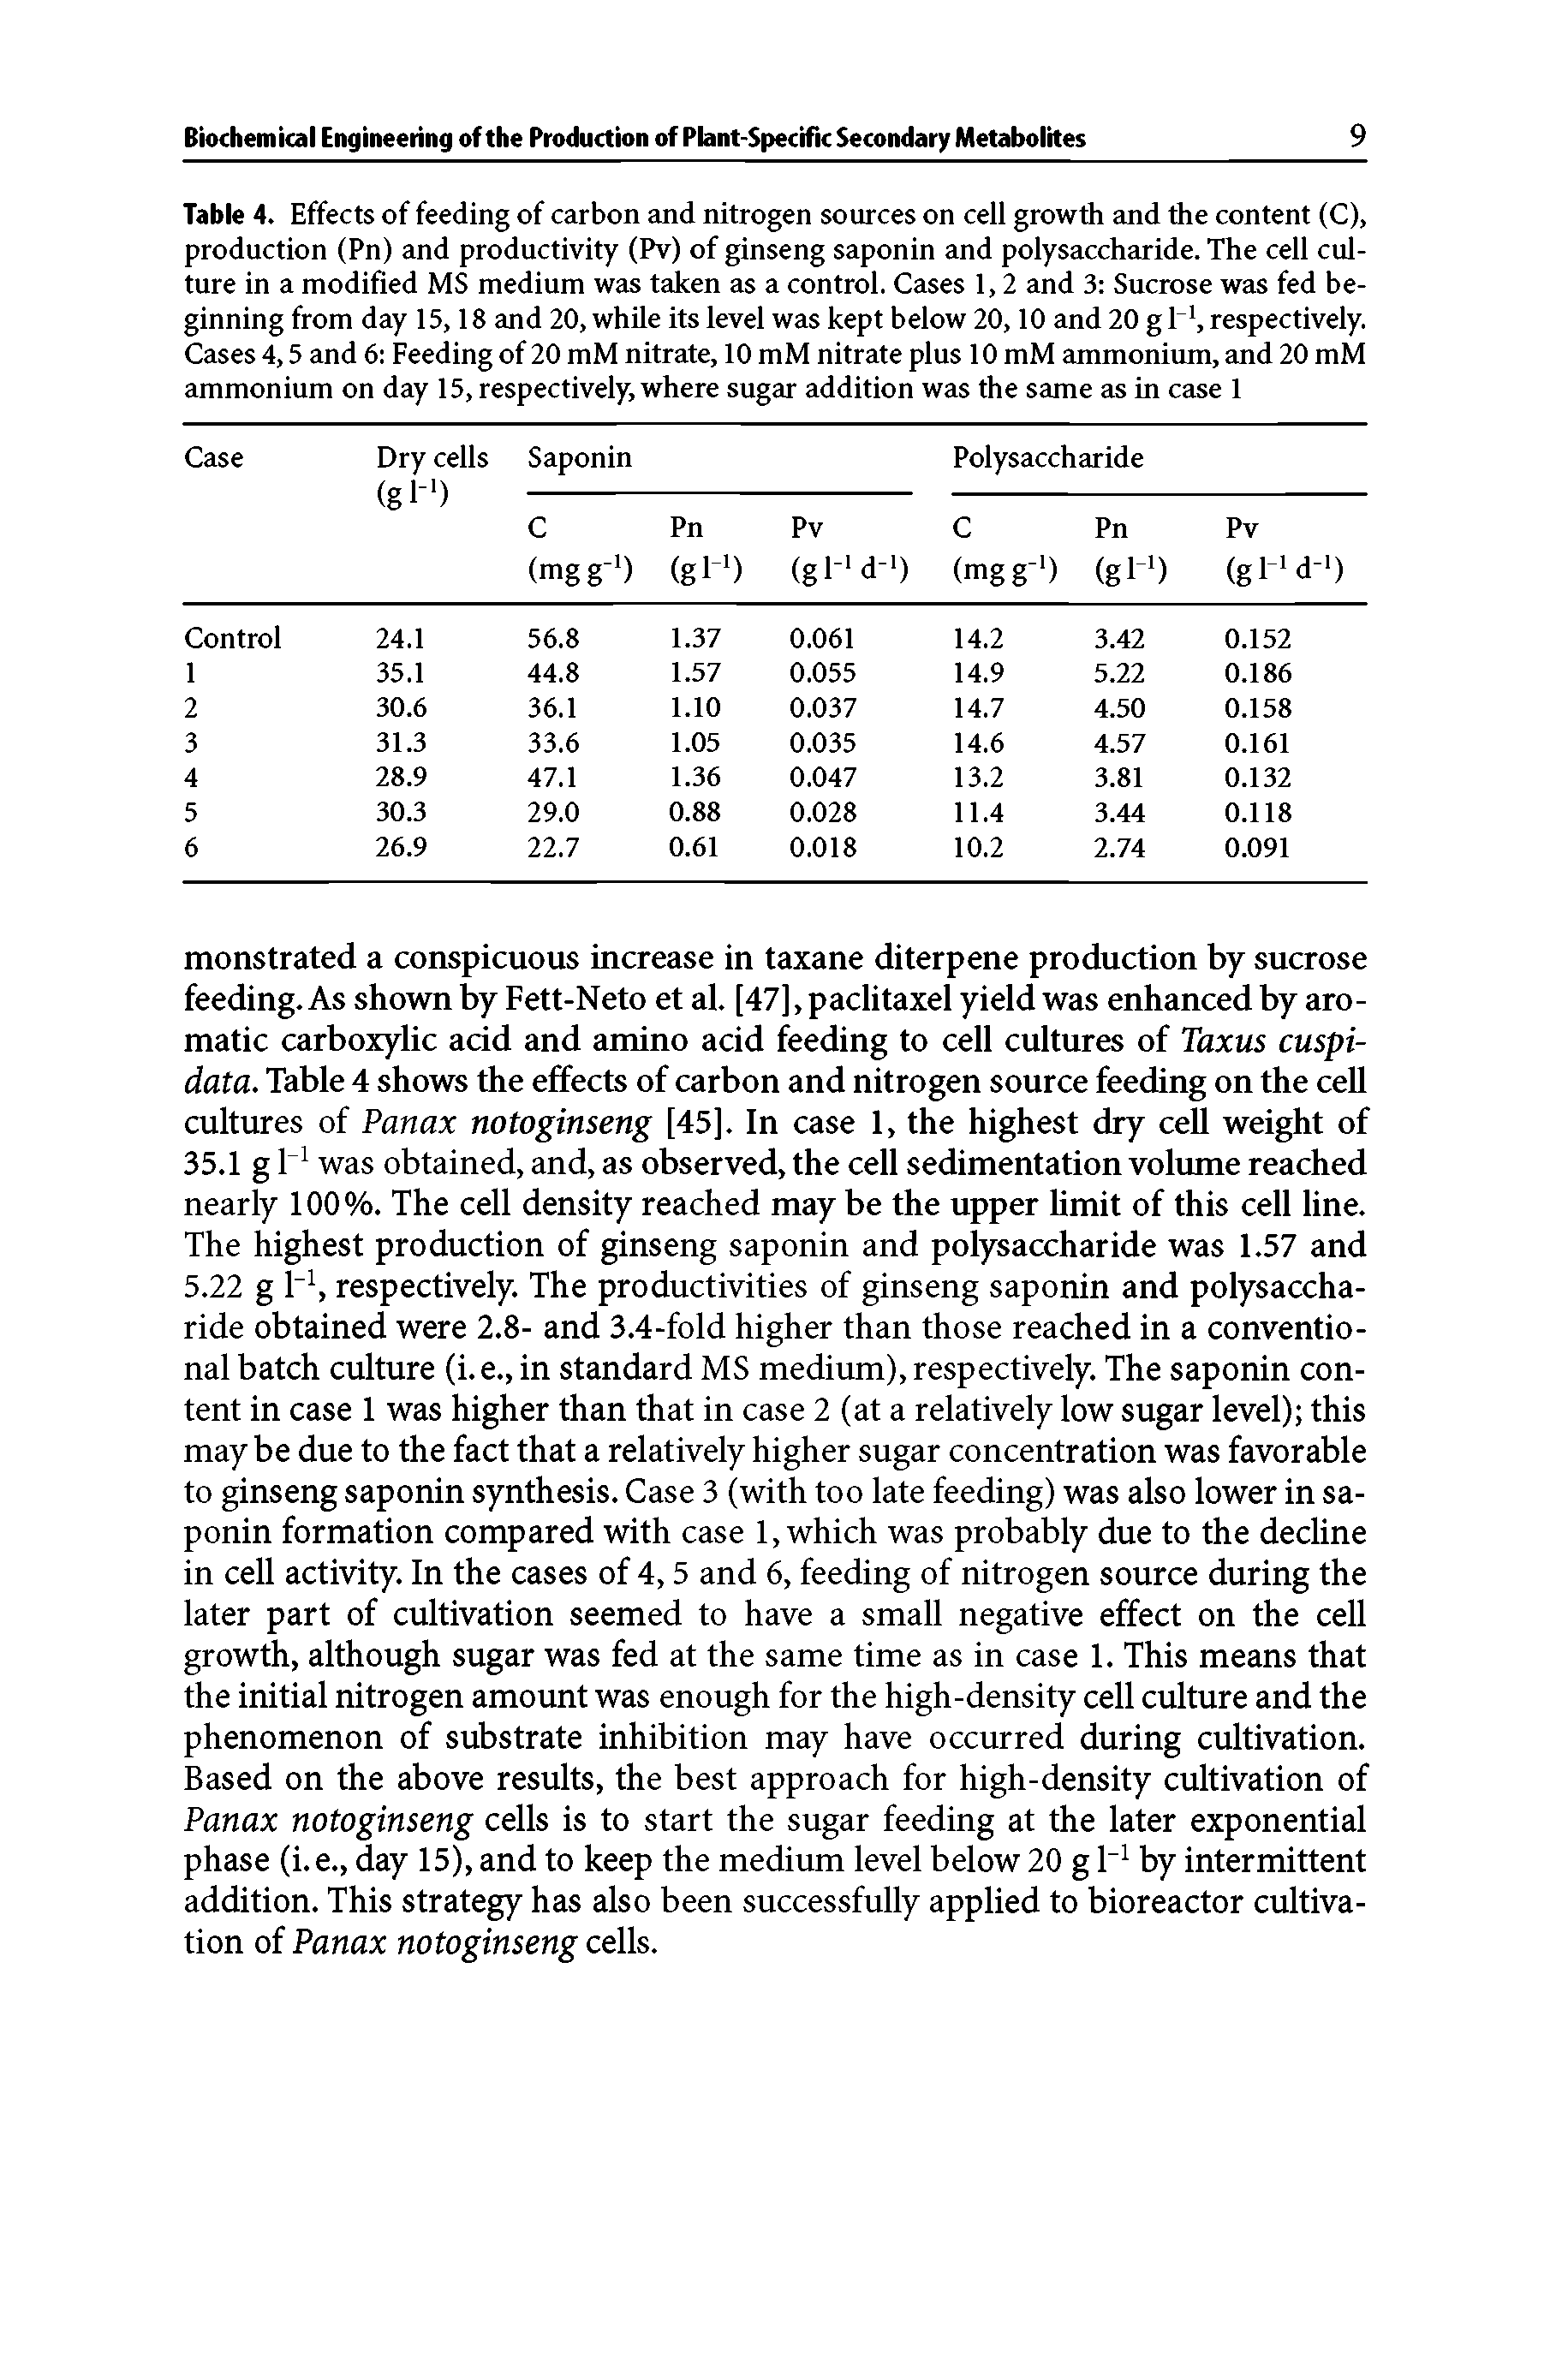 Table 4. Effects of feeding of carbon and nitrogen sources on cell growth and the content (C), production (Pn) and productivity (Pv) of ginseng saponin and polysaccharide. The cell culture in a modified MS medium was taken as a control. Cases 1,2 and 3 Sucrose was fed beginning from day 15,18 and 20, while its level was kept below 20,10 and 20 gH, respectively. Cases 4,5 and 6 Feeding of 20 mM nitrate, 10 mM nitrate plus 10 mM ammonium, and 20 mM ammonium on day 15, respectively, where sugar addition was the same as in case 1...